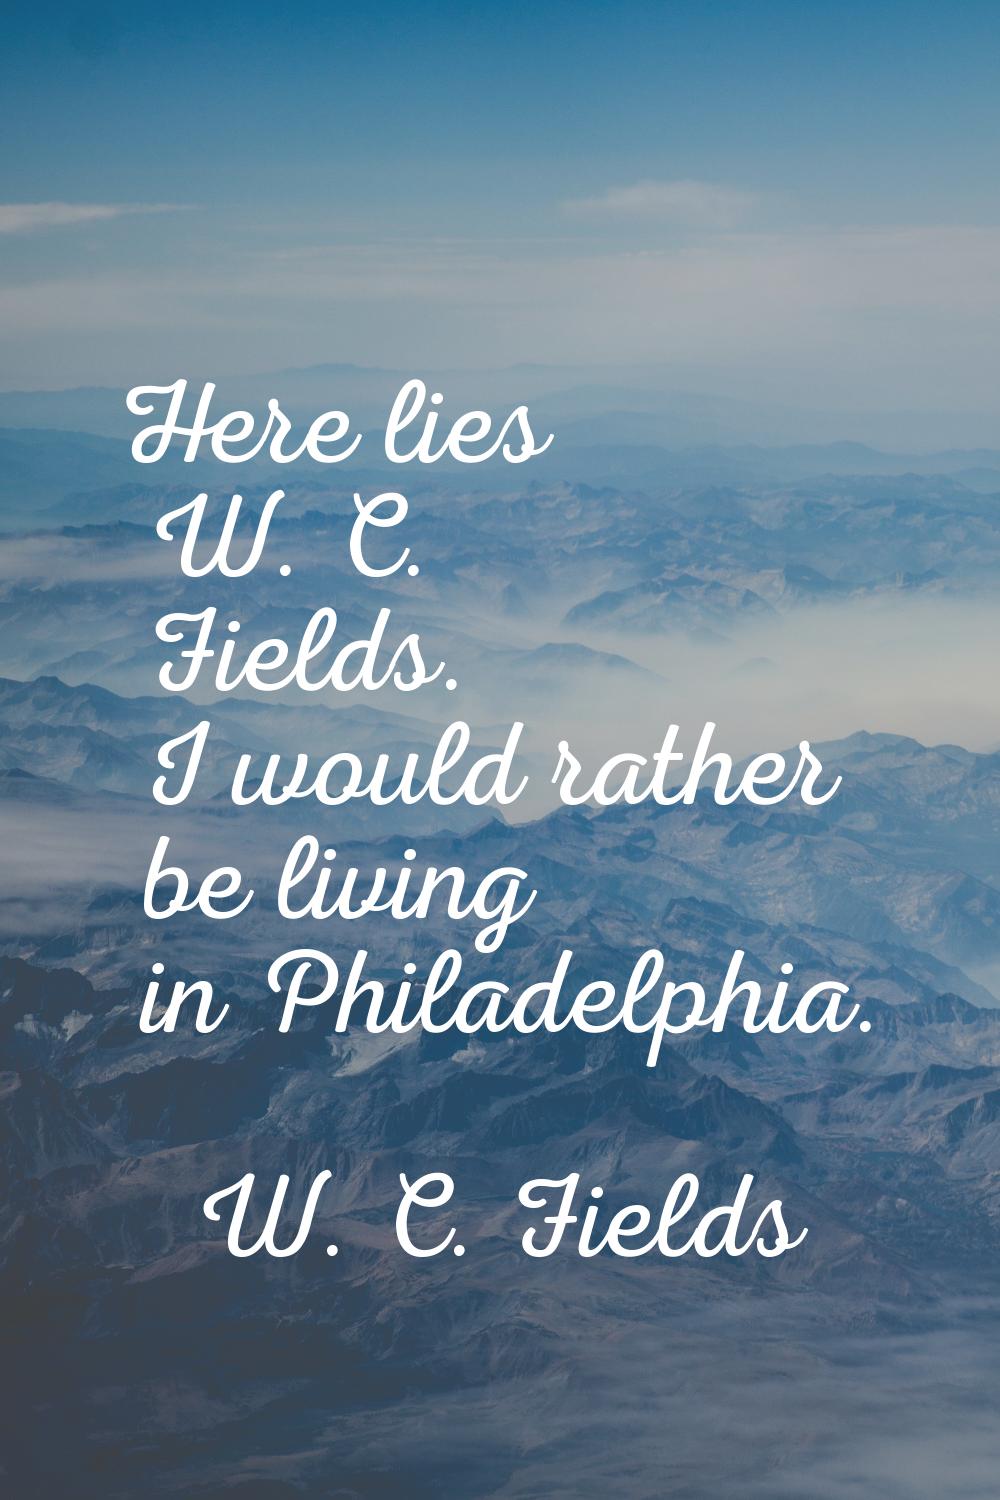 Here lies W. C. Fields. I would rather be living in Philadelphia.